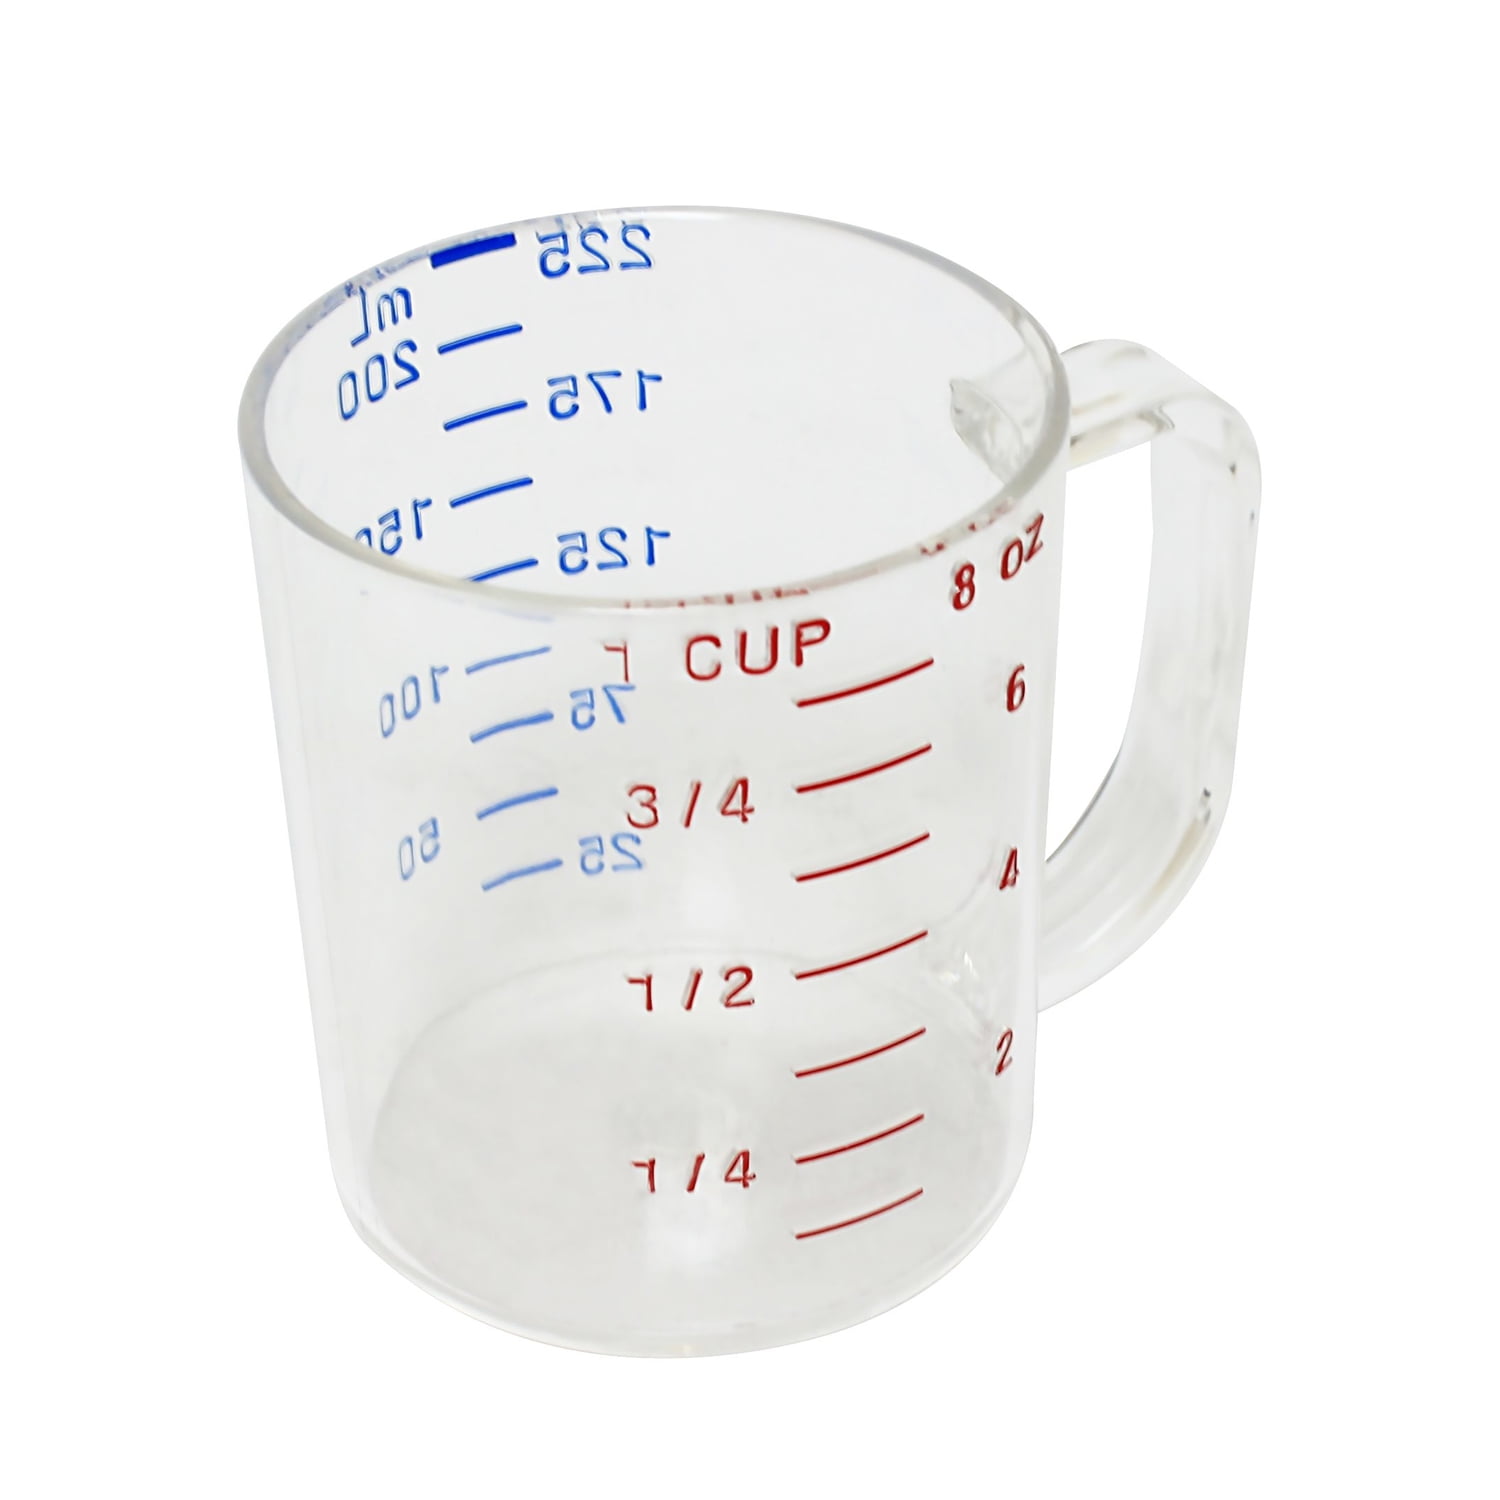 Royal Industries Polycarbonate Liquid Measuring Cup, 1 cup, graduated in  cups/ml